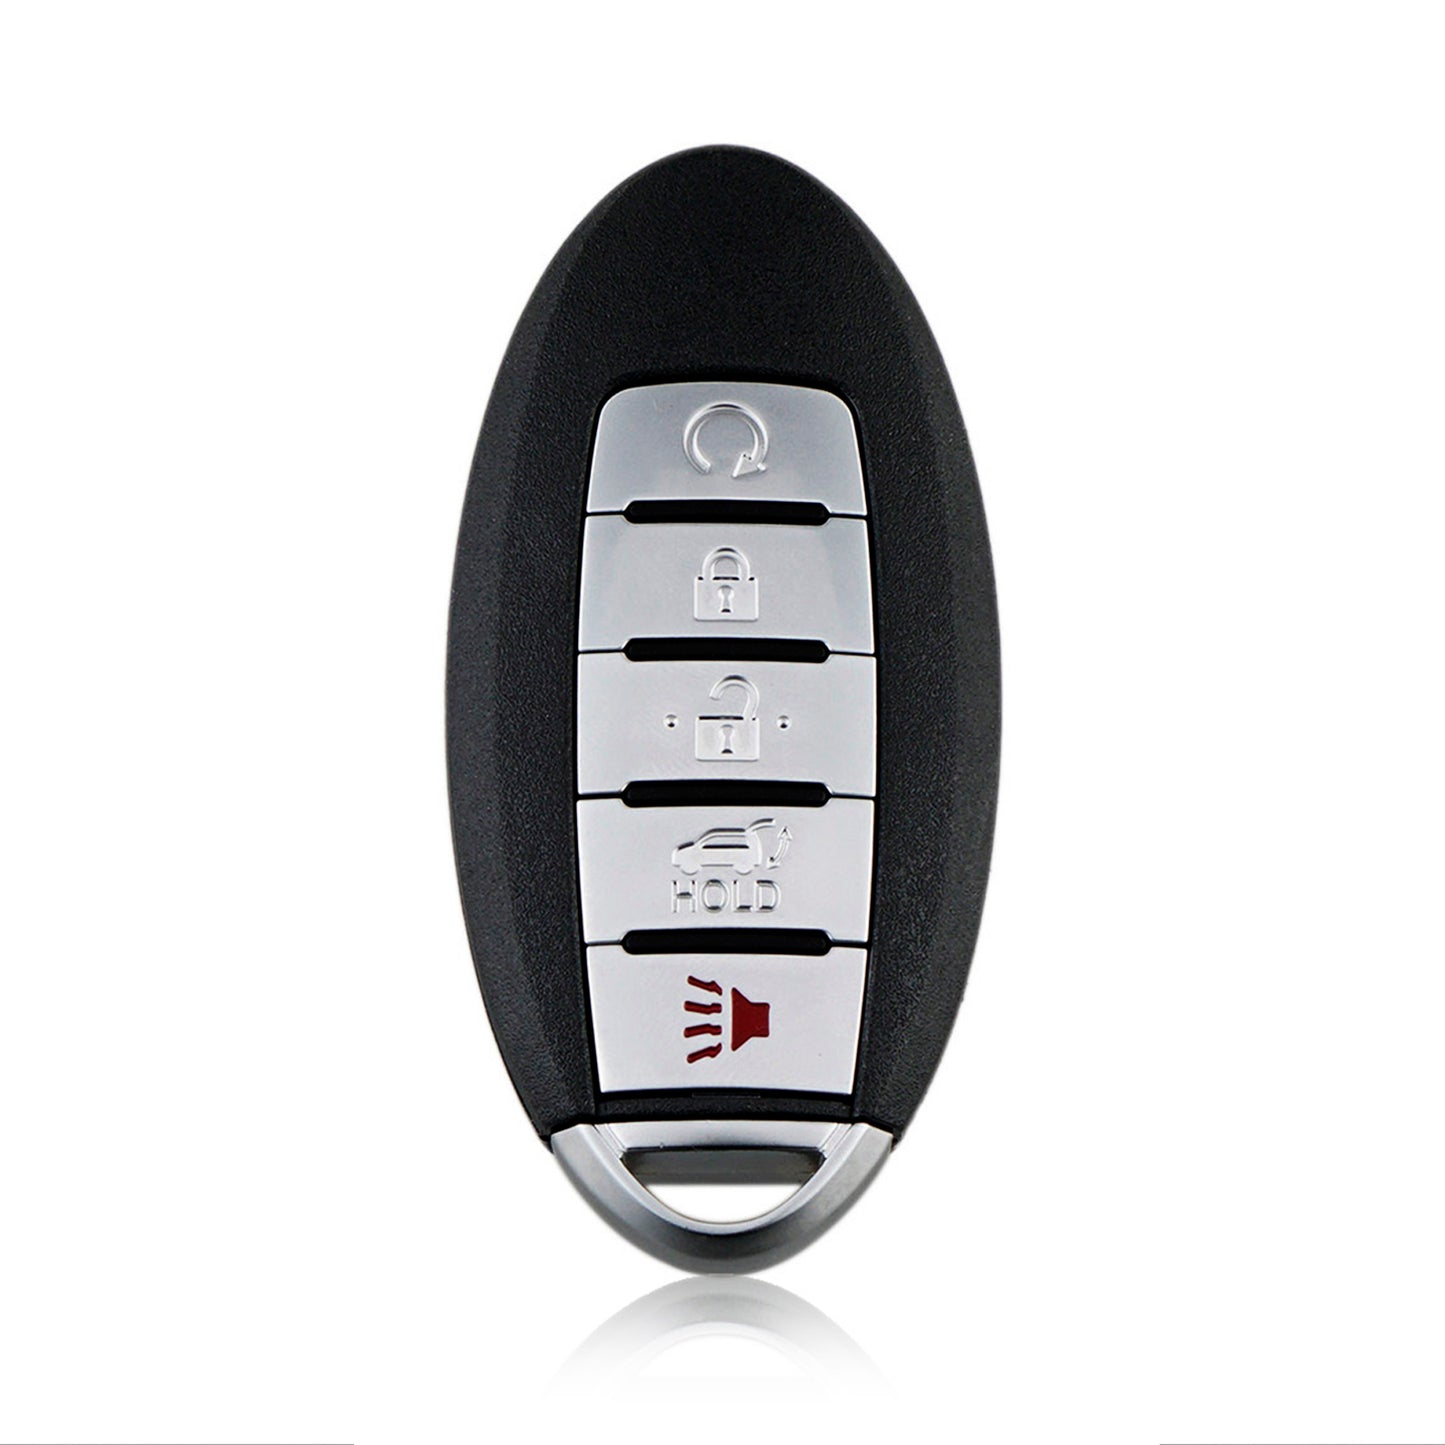 5 Buttons 433MHz Smart Remote Car Key For 2015-2018 Nissan Maxima Altima  Infiniti Q50 ( 5 Button Remotes Only) Q60 SKU : J323